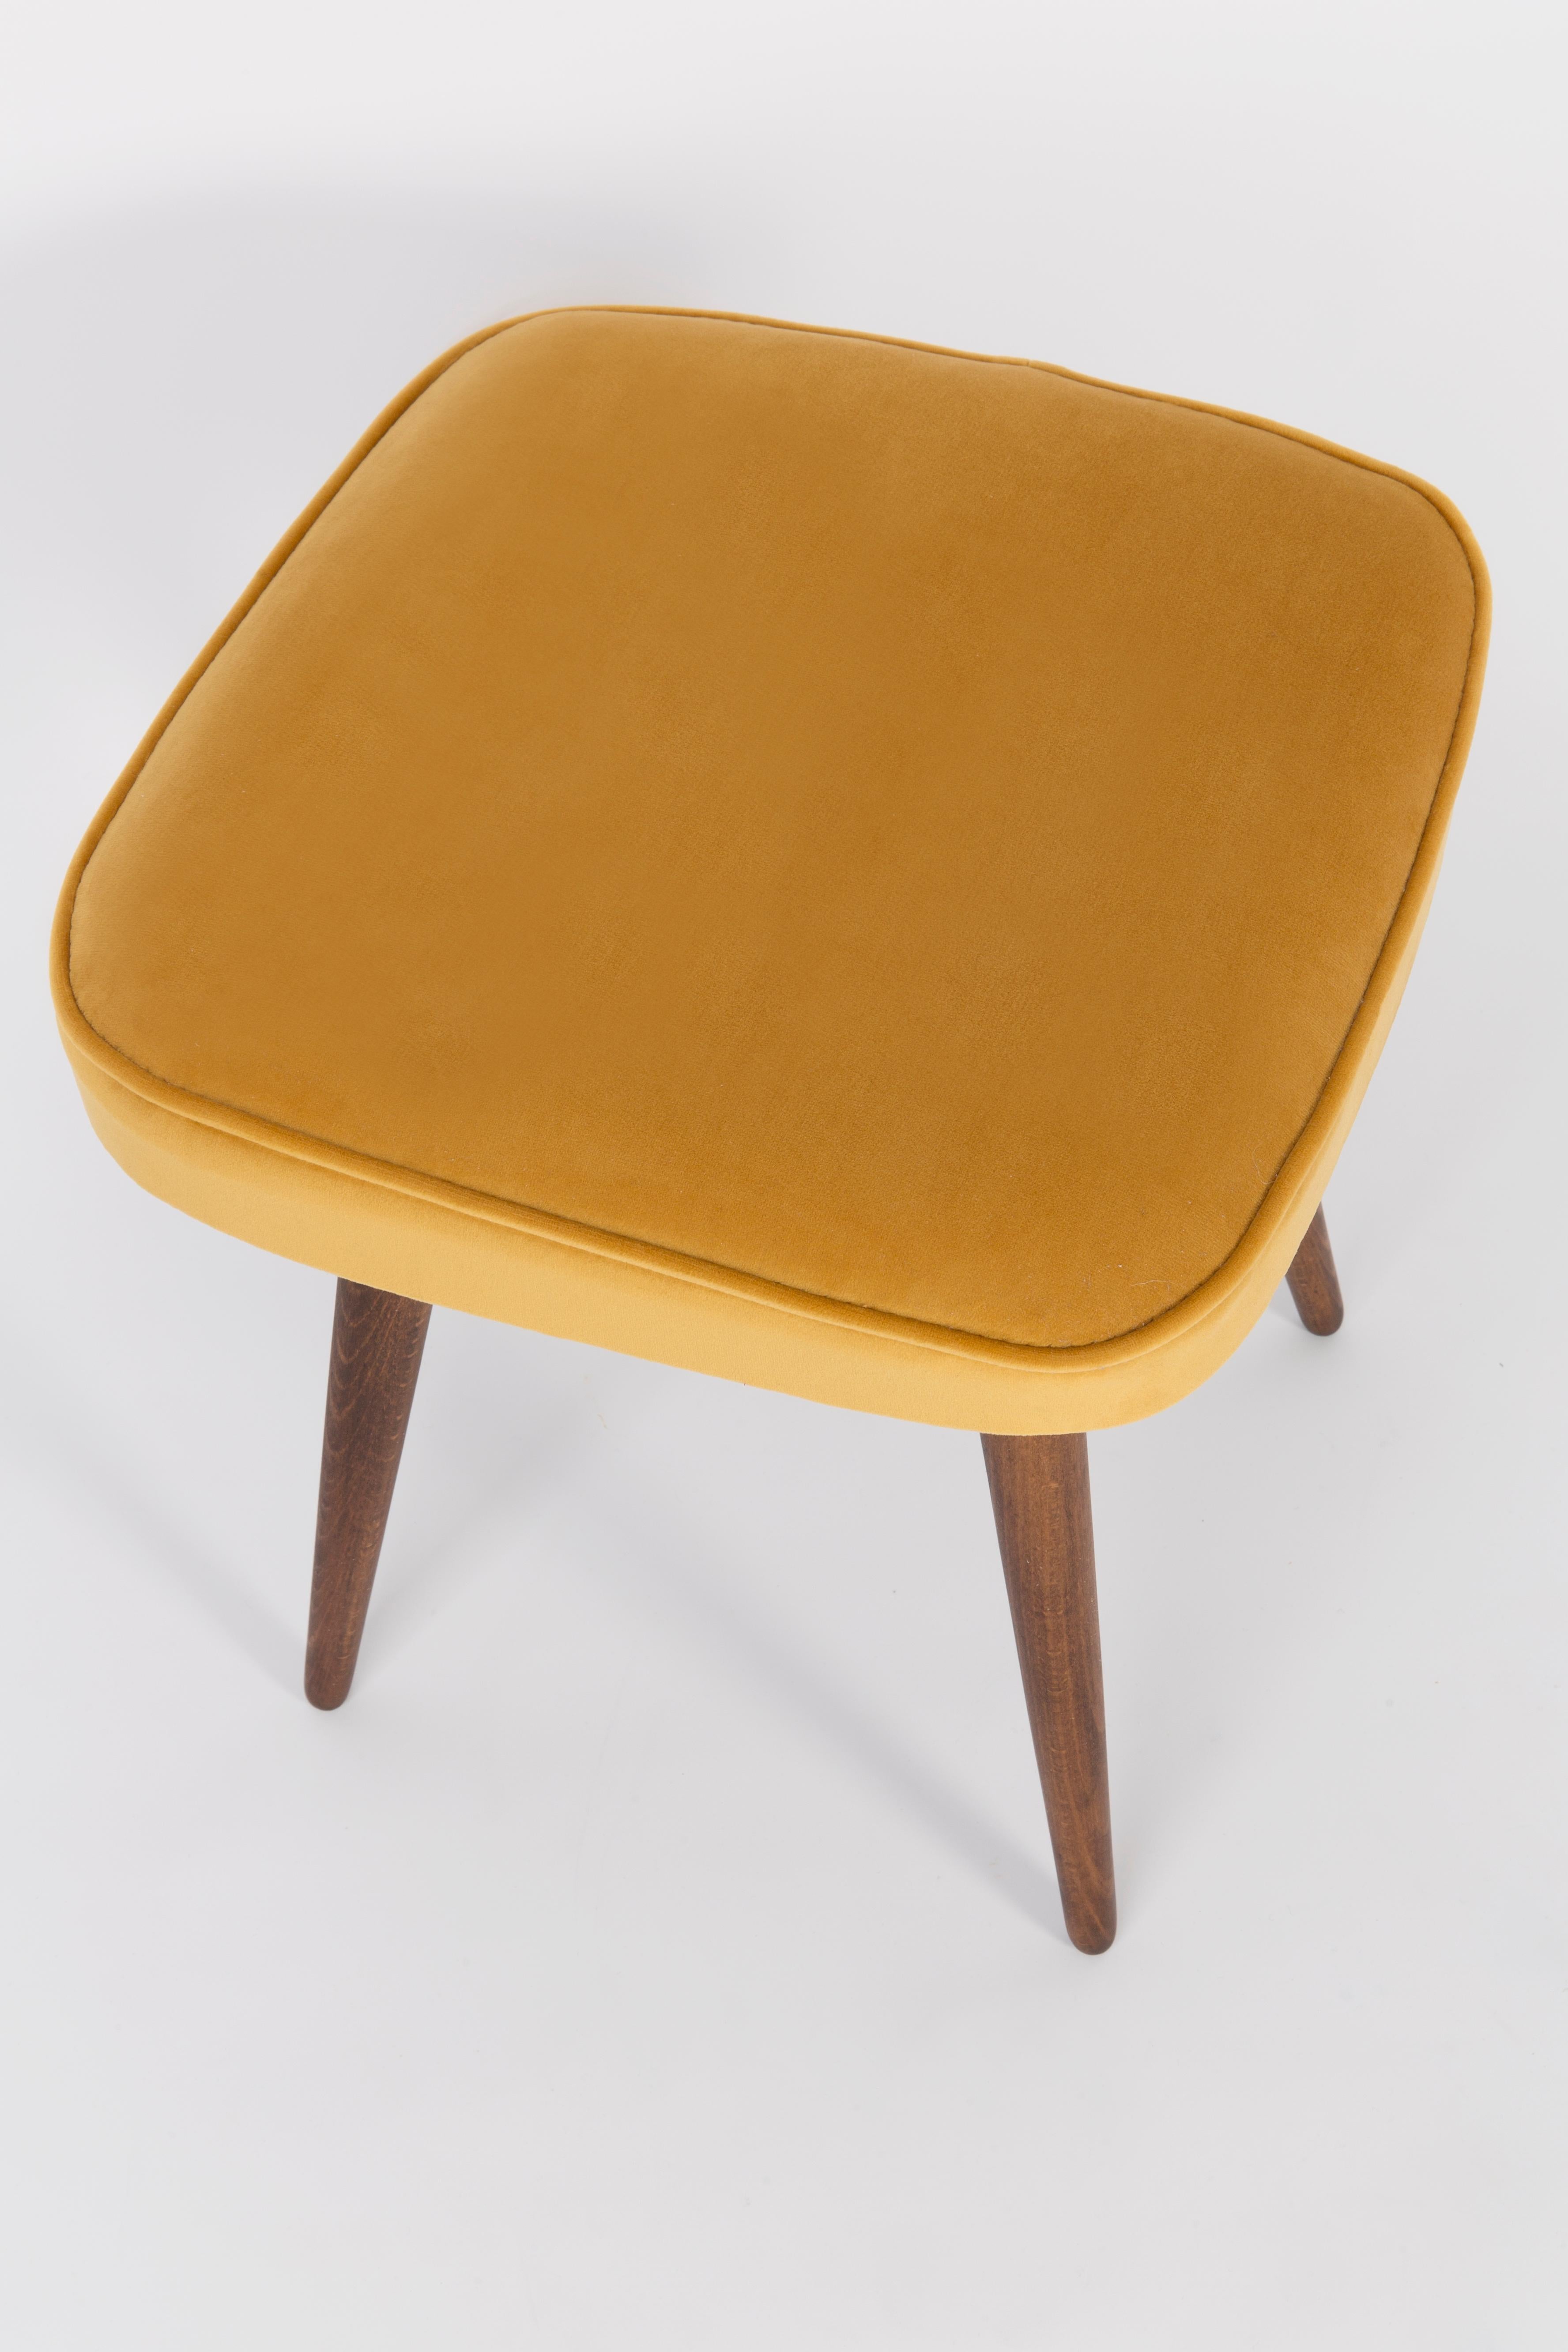 Stool from the turn of the 1960s and 1970s. Beautiful mustard velor upholstery. The stool consists of an upholstered part, a seat and wooden legs narrowing downwards, characteristic of the 1960s style. We can prepare this pair also in another color